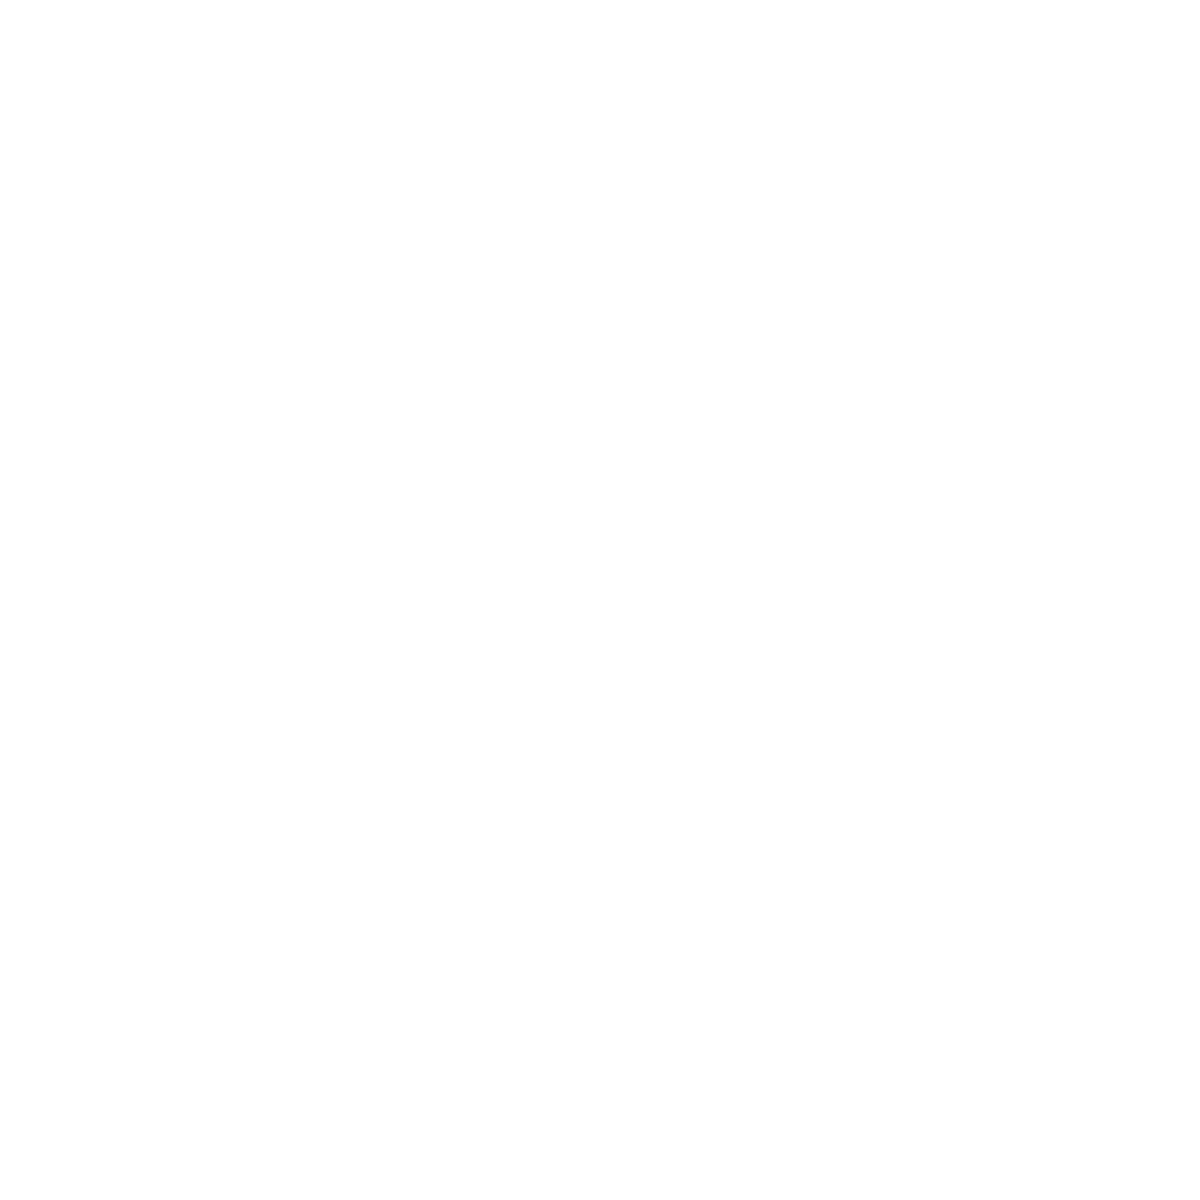 Online purchase icon